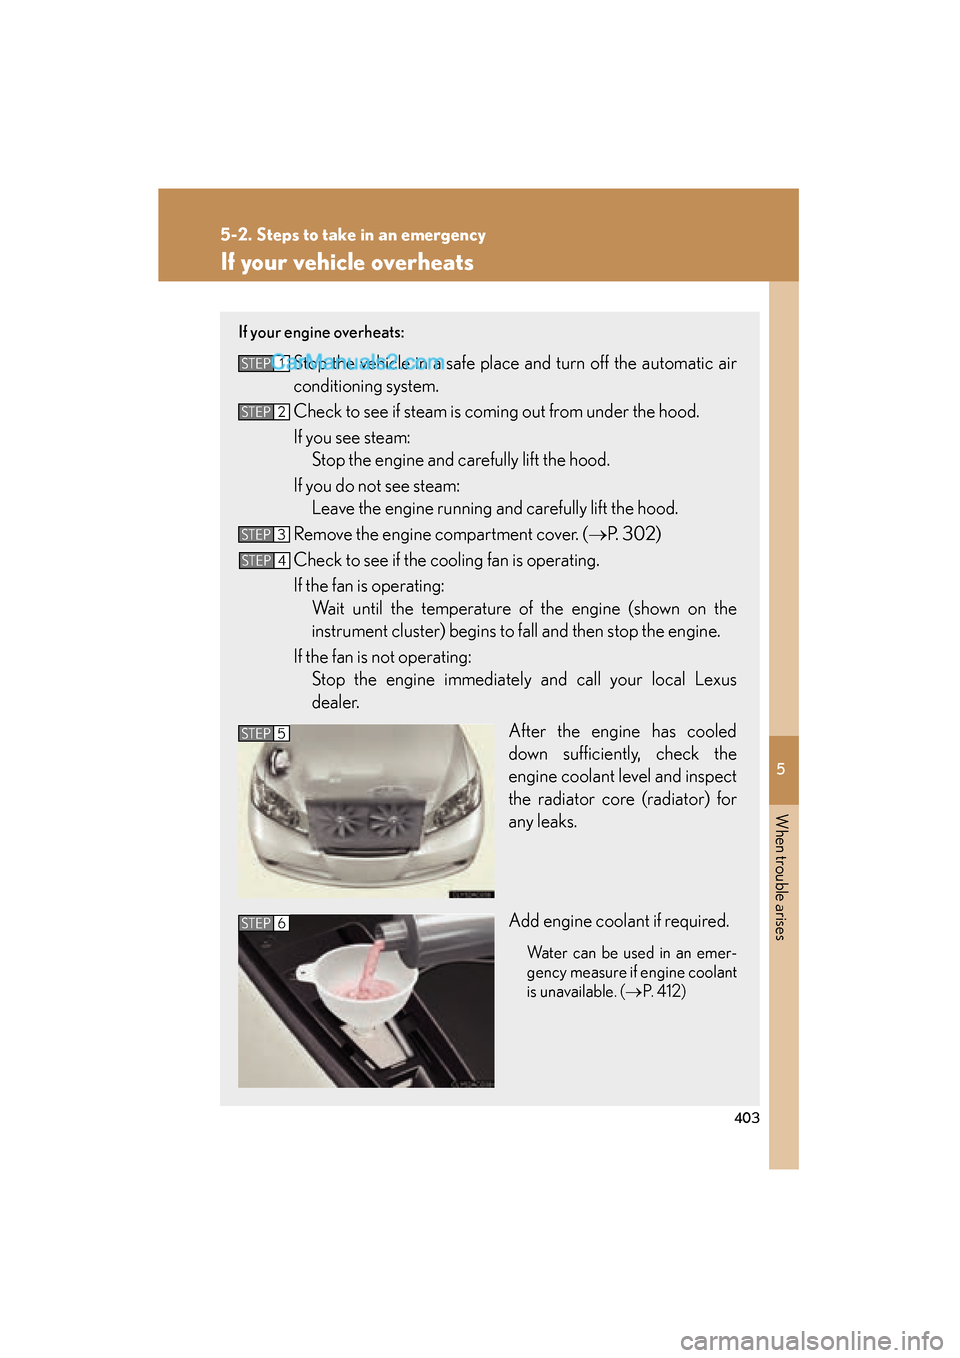 Lexus ES350 2008  Owners Manual 5
When trouble arises
403
5-2. Steps to take in an emergency
ES350_U_(L/O_0708)
If your vehicle overheats
If your engine overheats:
Stop the vehicle in a safe place and turn off the automatic air
cond